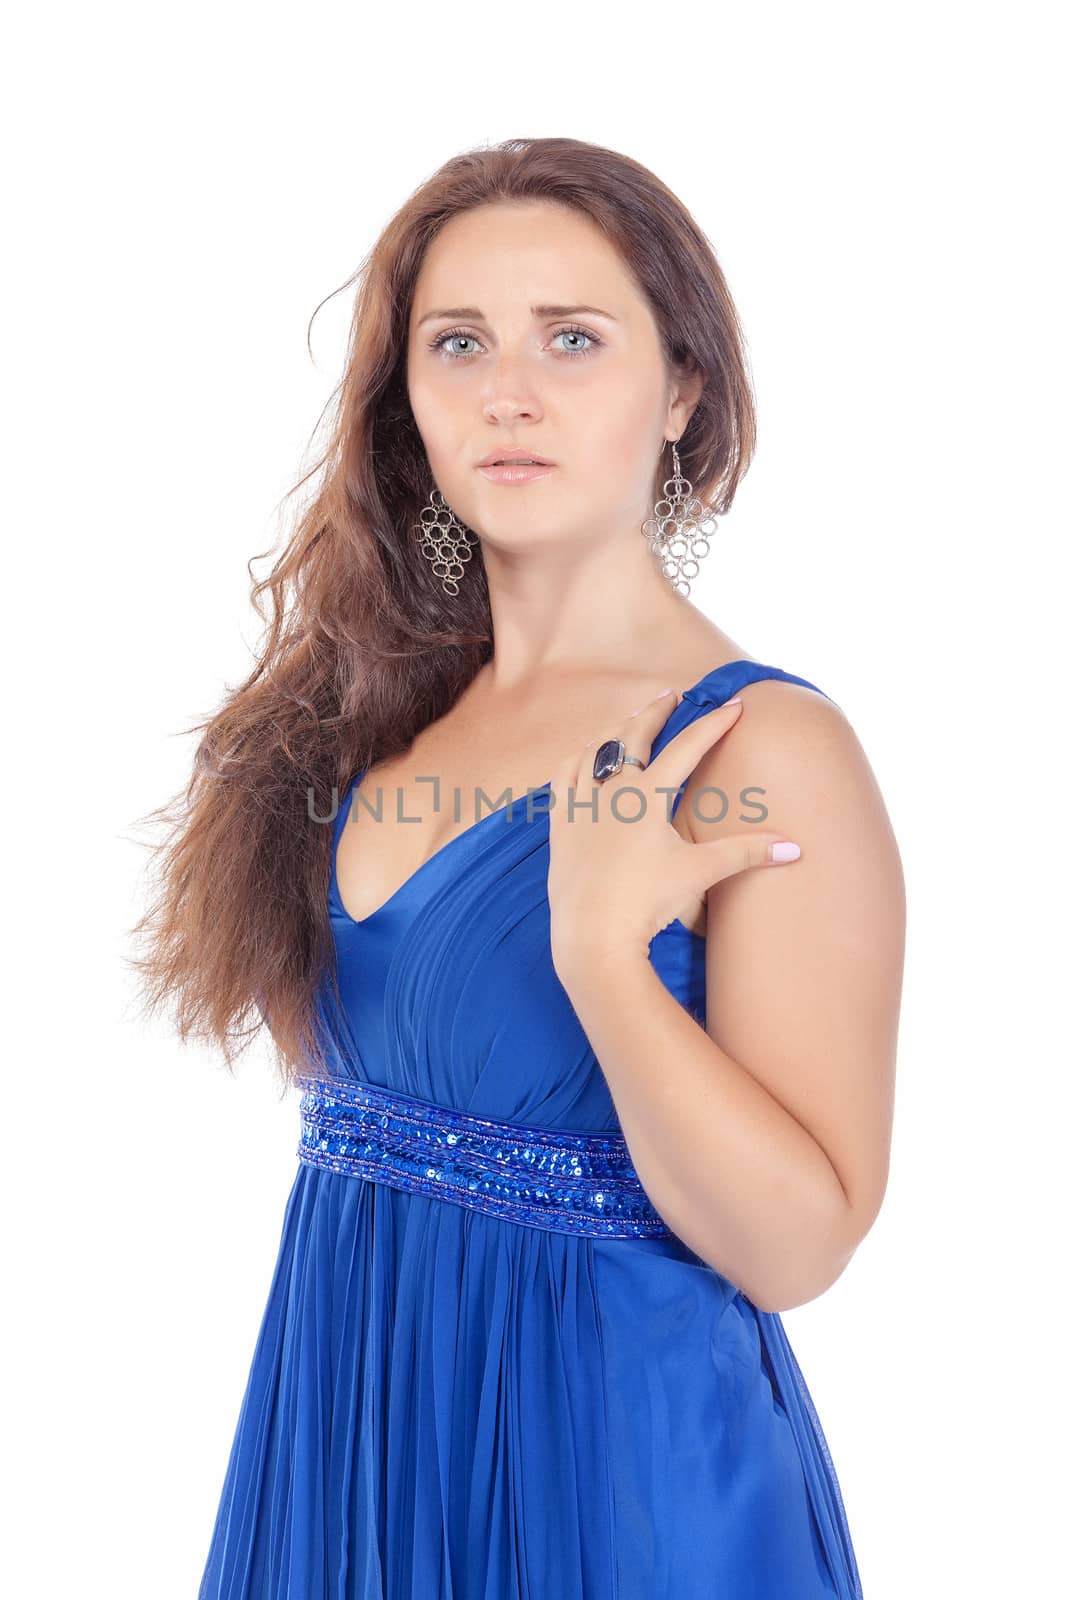 Portrait of a beautiful young woman in blue dress on white background